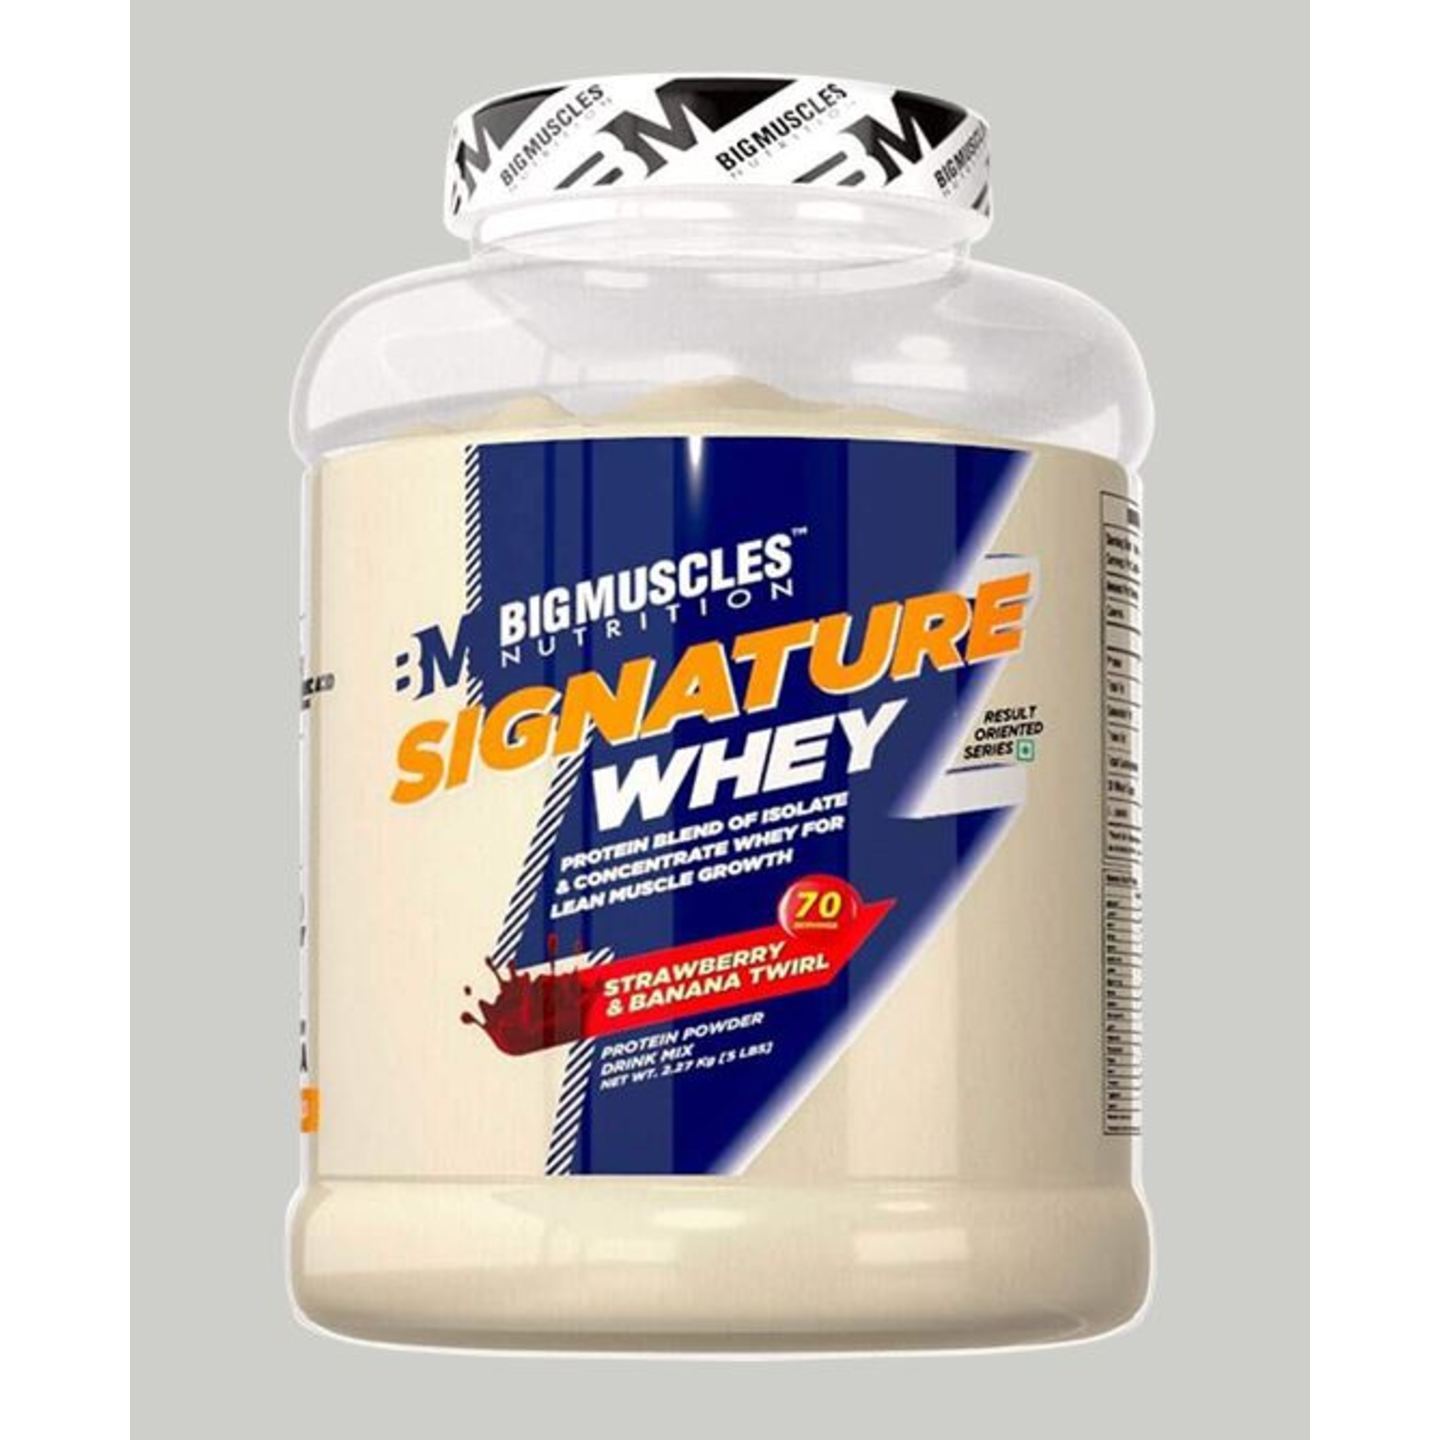 MastMart Bigmuscles Nutrition Signature Whey Protein Strawberry Banana Twirl 5lbs